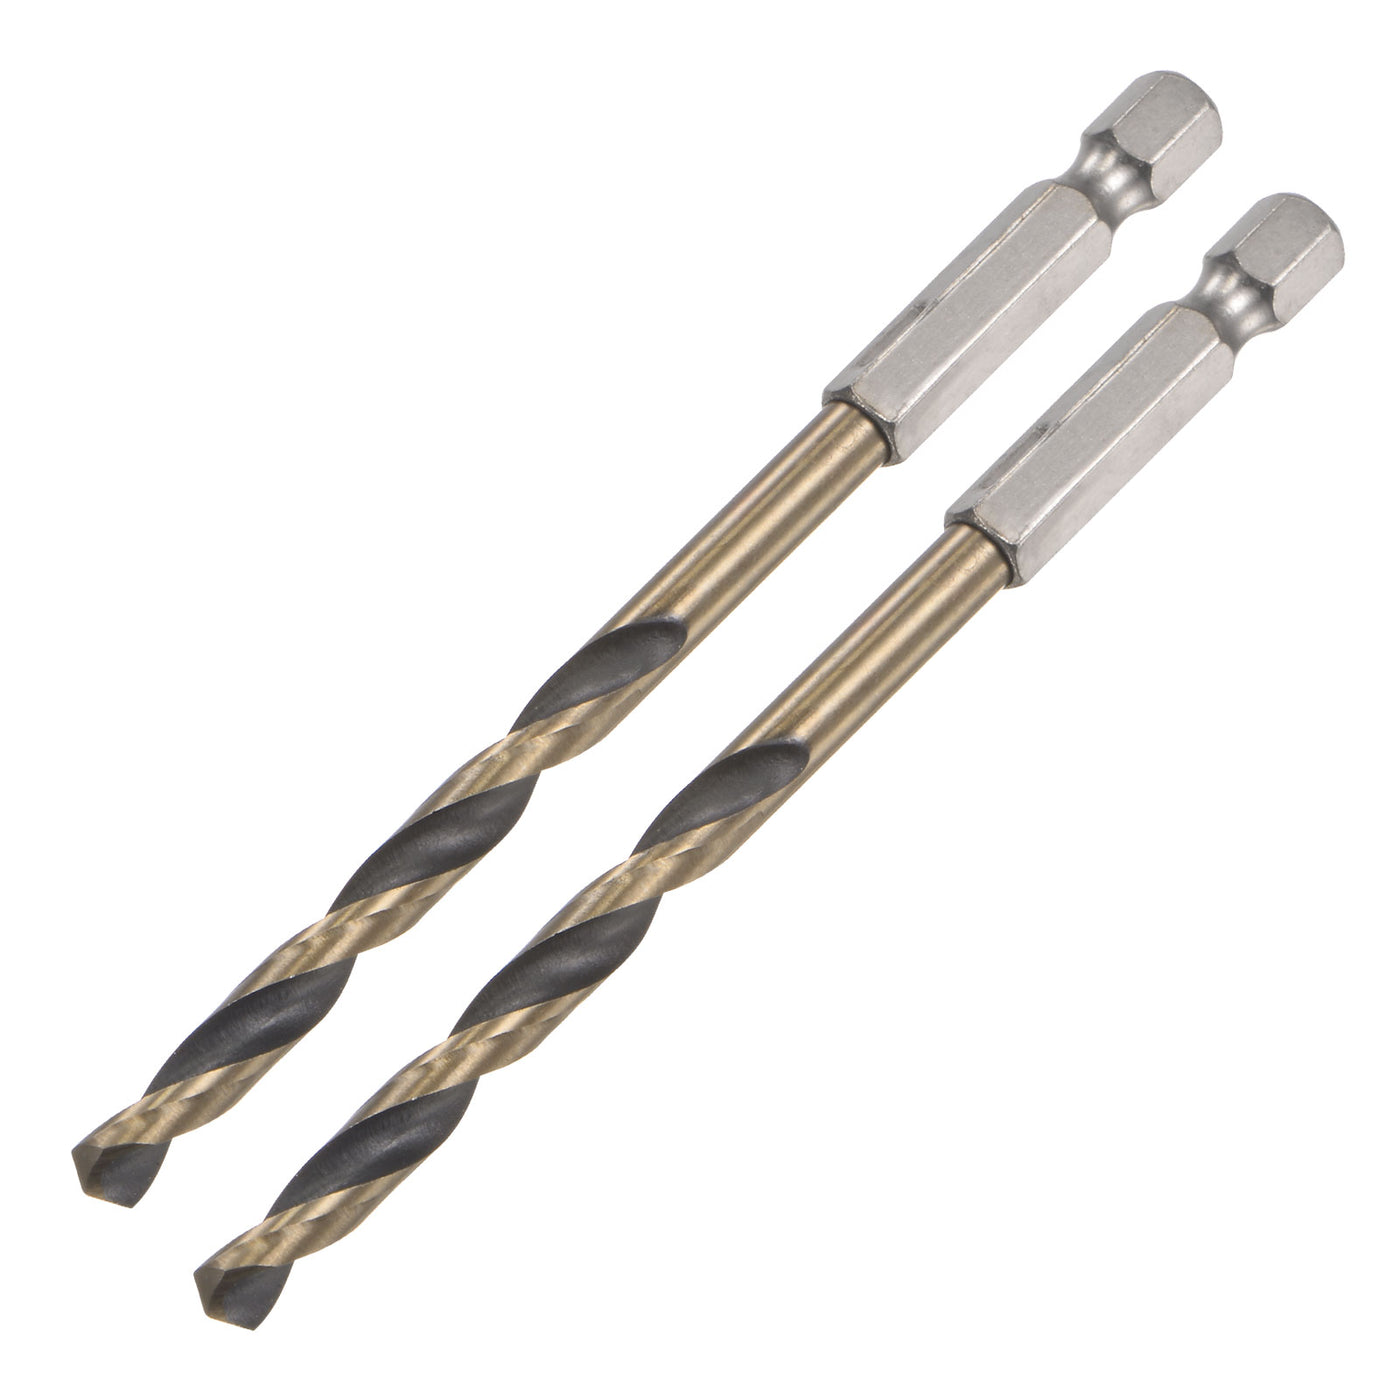 uxcell Uxcell 2Pcs 5.2mm High Speed Steel Twist Drill Bit with Hex Shank 104mm Length